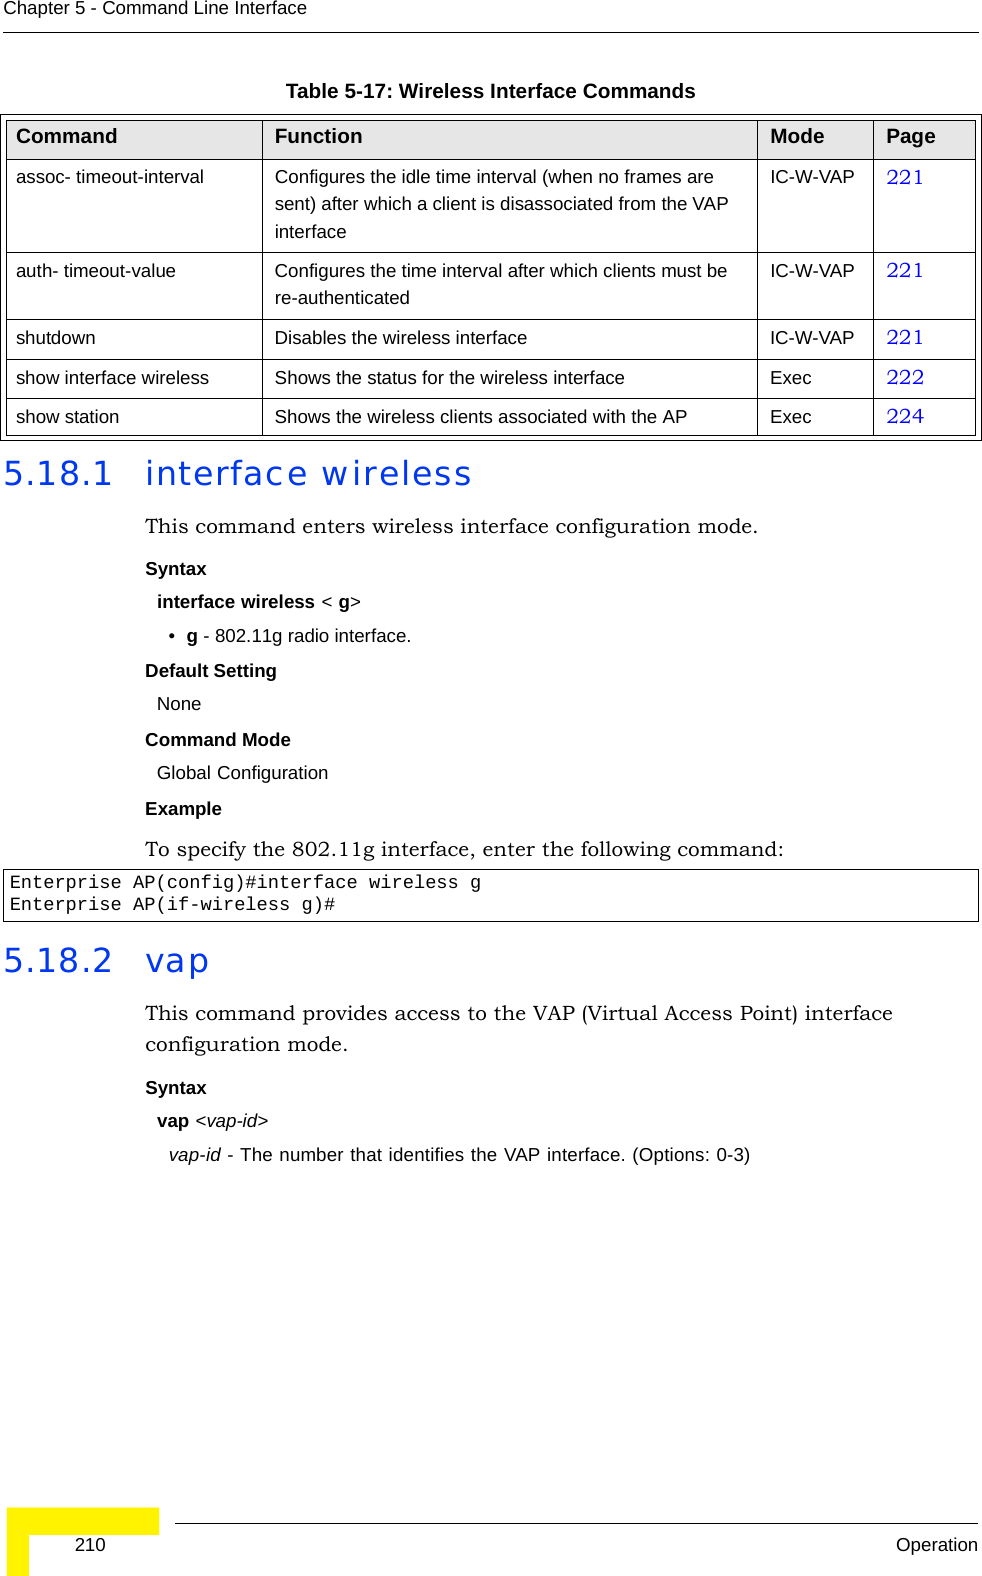  210 OperationChapter 5 - Command Line Interface5.18.1 interface wirelessThis command enters wireless interface configuration mode.Syntaxinterface wireless &lt; g&gt;•g - 802.11g radio interface.Default Setting NoneCommand Mode Global Configuration Example To specify the 802.11g interface, enter the following command:5.18.2 vapThis command provides access to the VAP (Virtual Access Point) interface configuration mode.Syntaxvap &lt;vap-id&gt;vap-id - The number that identifies the VAP interface. (Options: 0-3)assoc- timeout-interval Configures the idle time interval (when no frames are sent) after which a client is disassociated from the VAP interfaceIC-W-VAP 221auth- timeout-value Configures the time interval after which clients must be re-authenticatedIC-W-VAP 221shutdown Disables the wireless interface IC-W-VAP 221show interface wireless Shows the status for the wireless interface Exec 222show station Shows the wireless clients associated with the AP Exec 224Enterprise AP(config)#interface wireless gEnterprise AP(if-wireless g)#Table 5-17: Wireless Interface CommandsCommand Function Mode Page